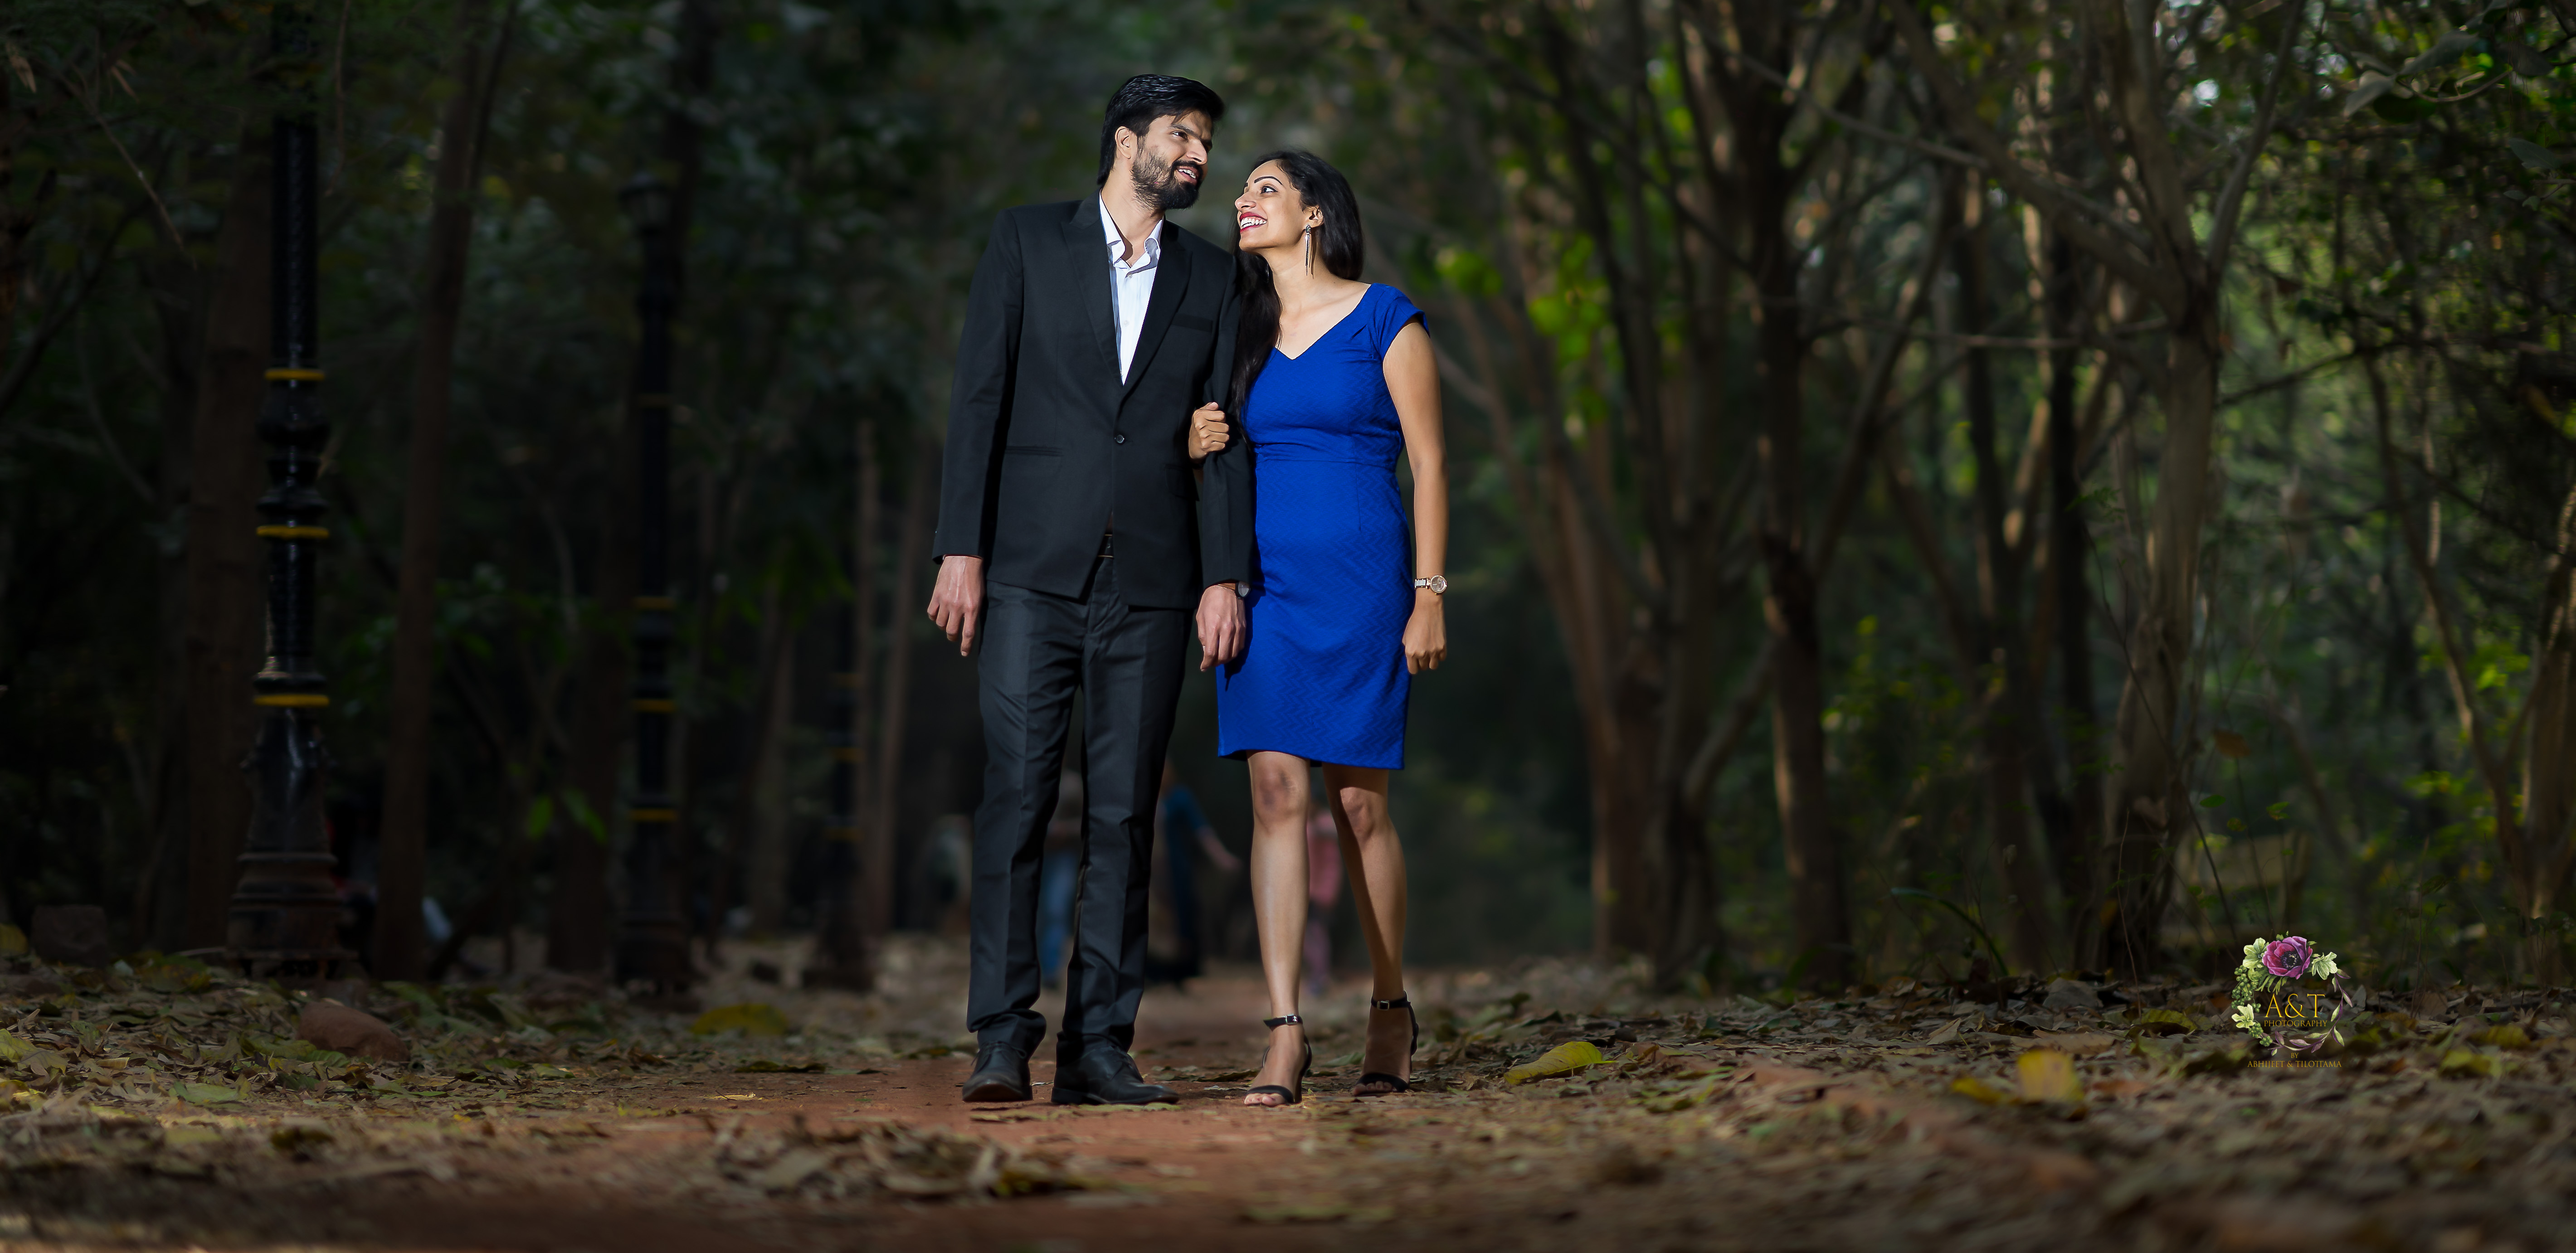 Heena & Vikas Walking on a beautiful Pathway for their best pre-wedding photoshoot in Pune